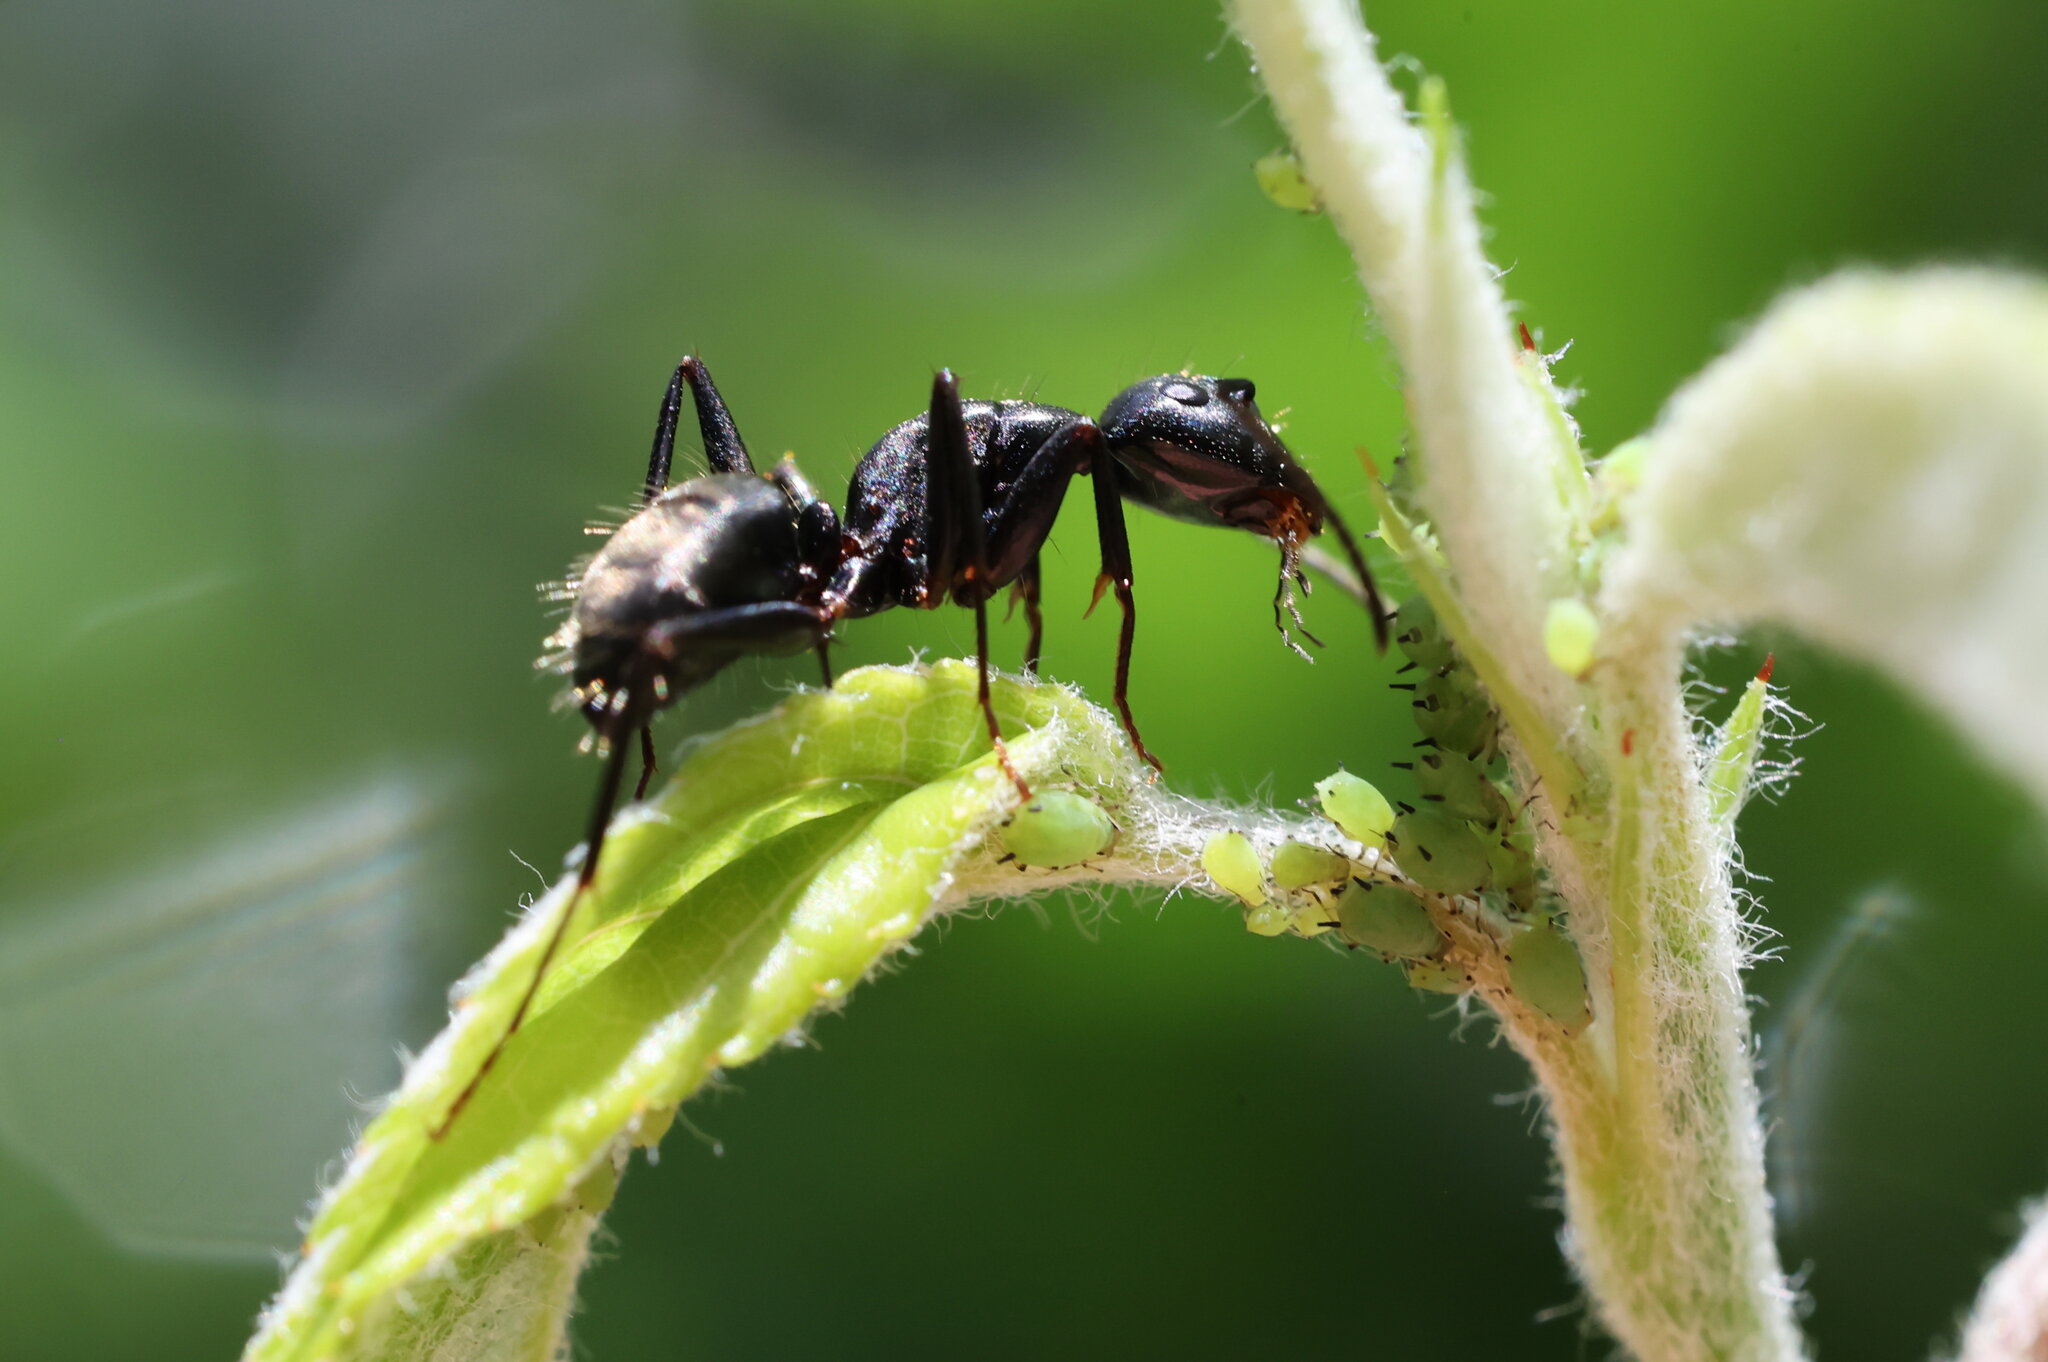 Ant with Aphids